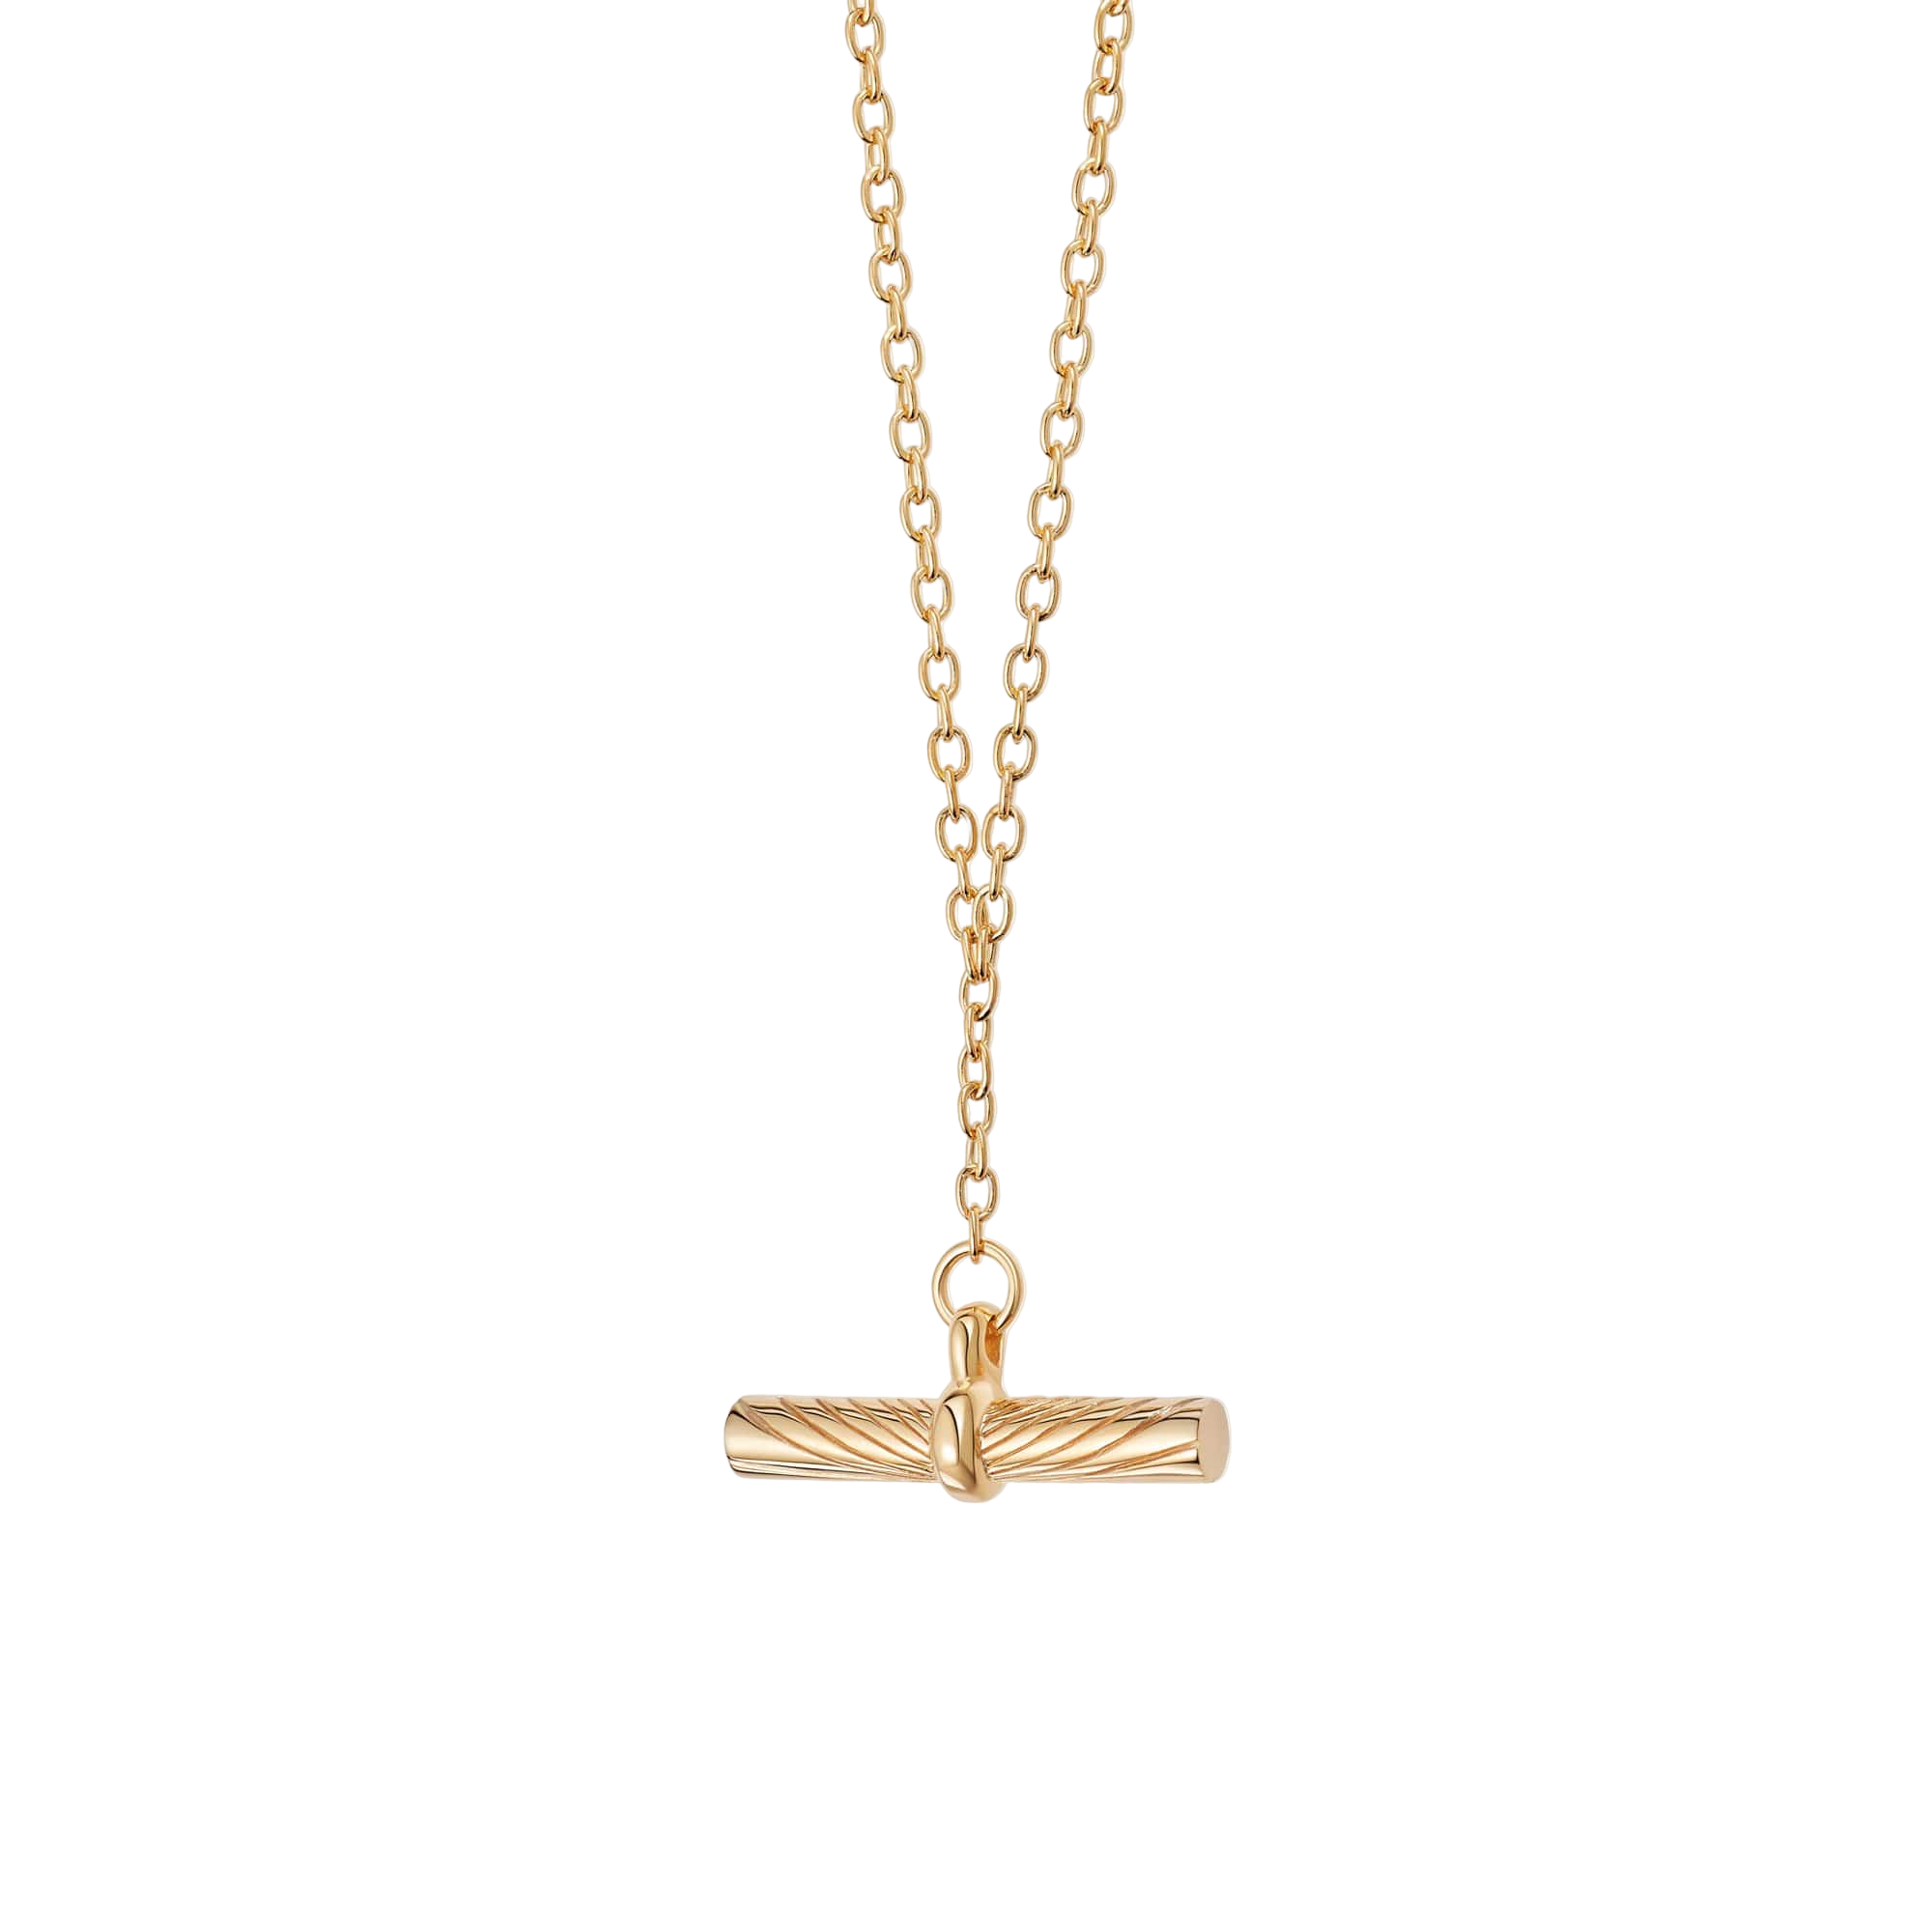 bar necklace for women, solid gold necklace, yellow gold necklace